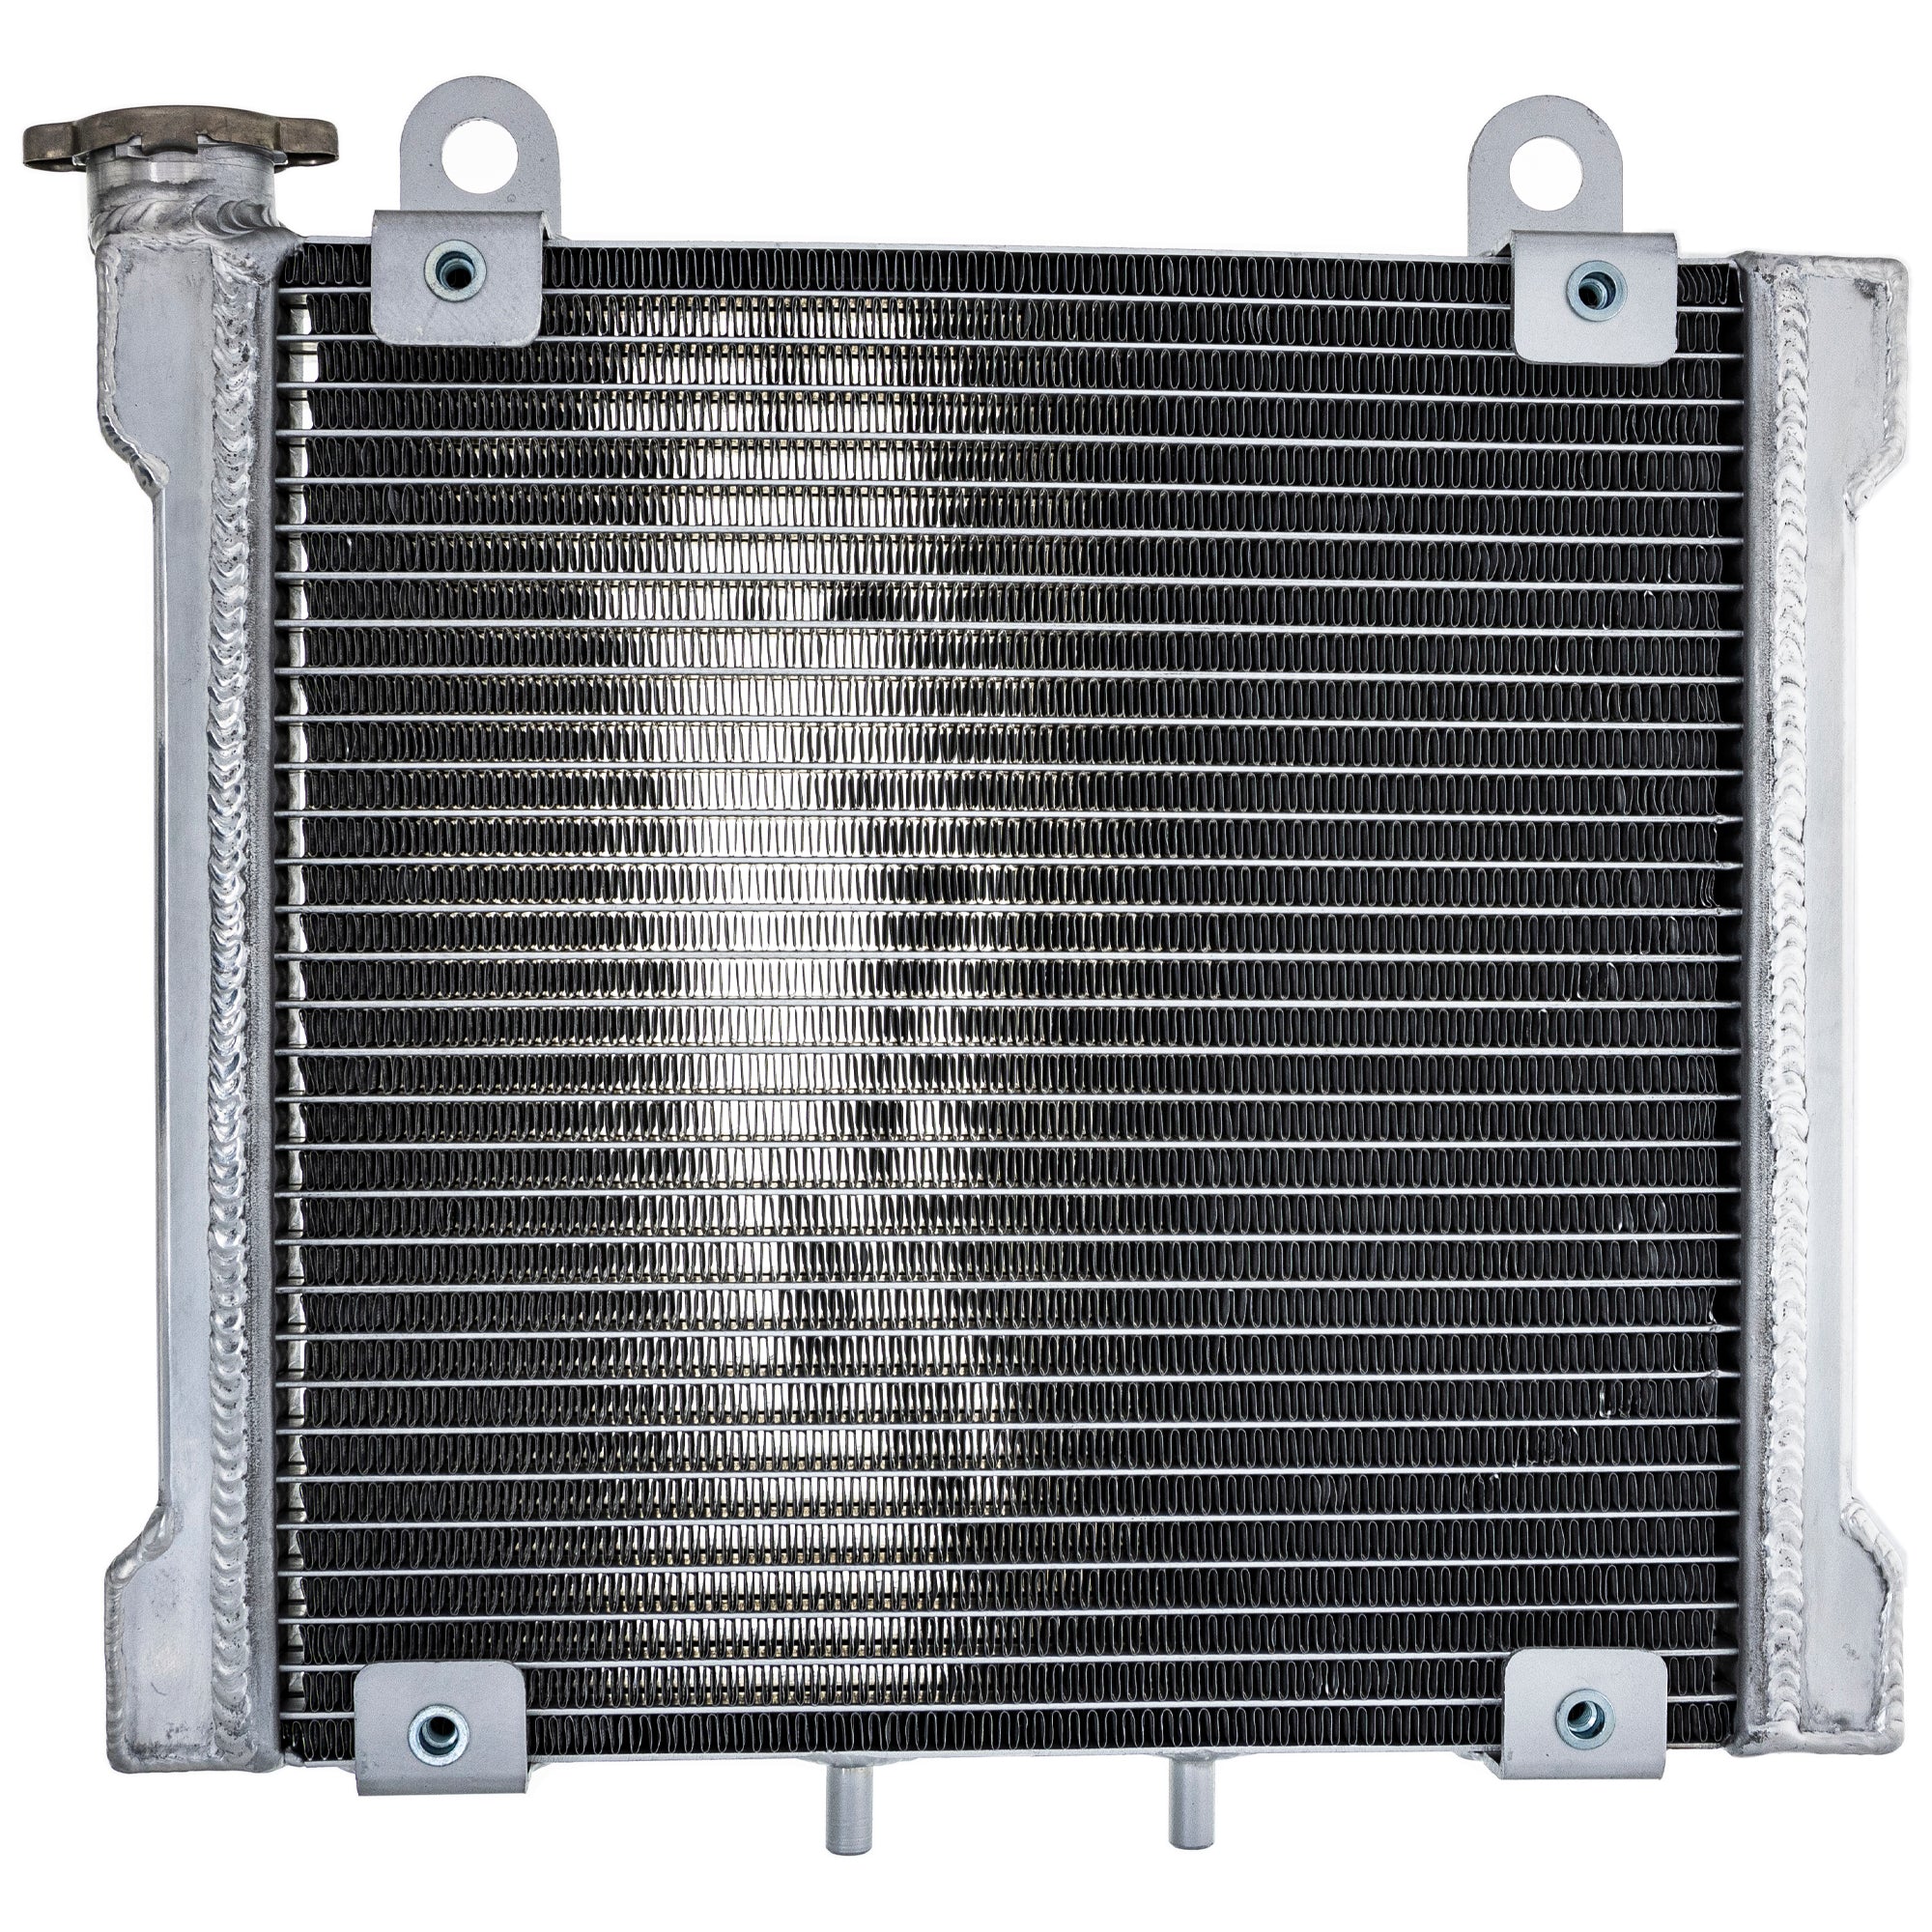 Radiator for Can-Am Bombardier DS650 X 709200145 2 Row with Cap